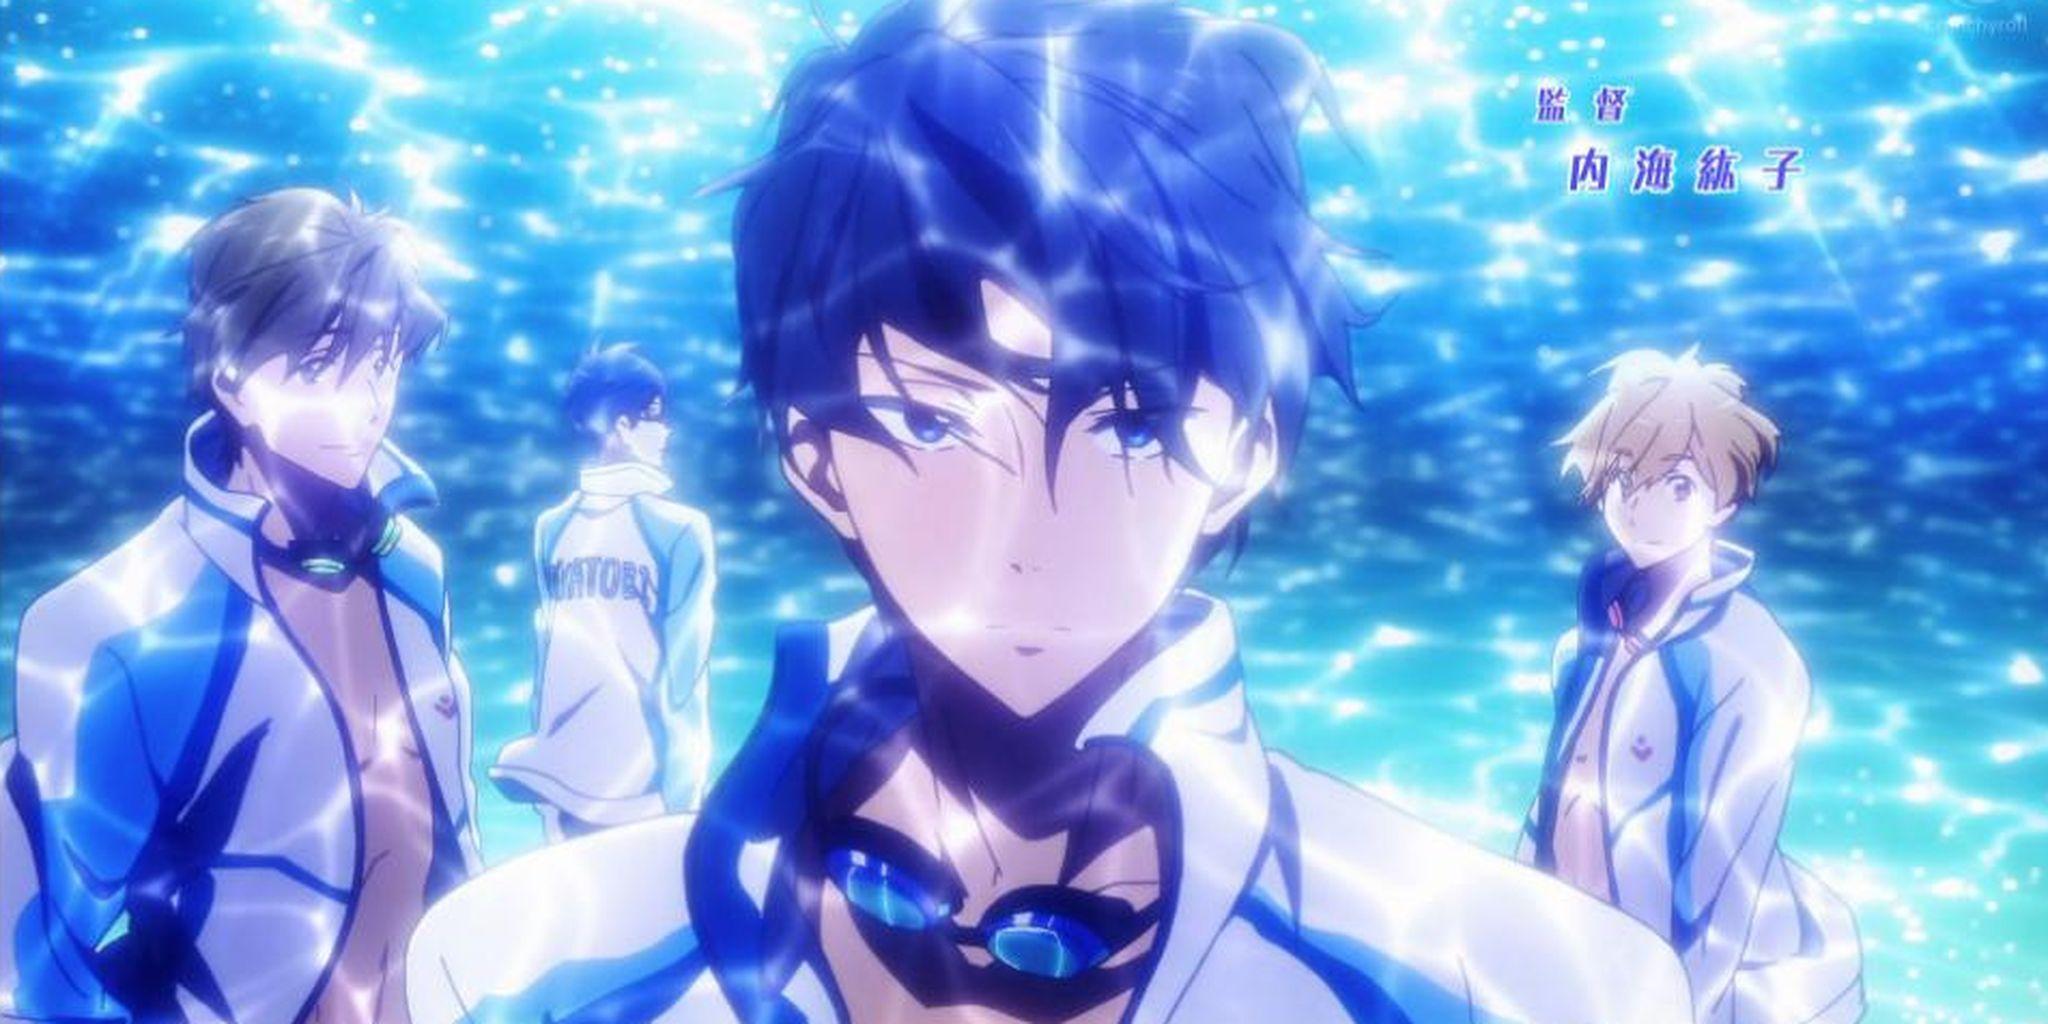 Swimming Anime debut is light on shirts, heavy on sexual tension